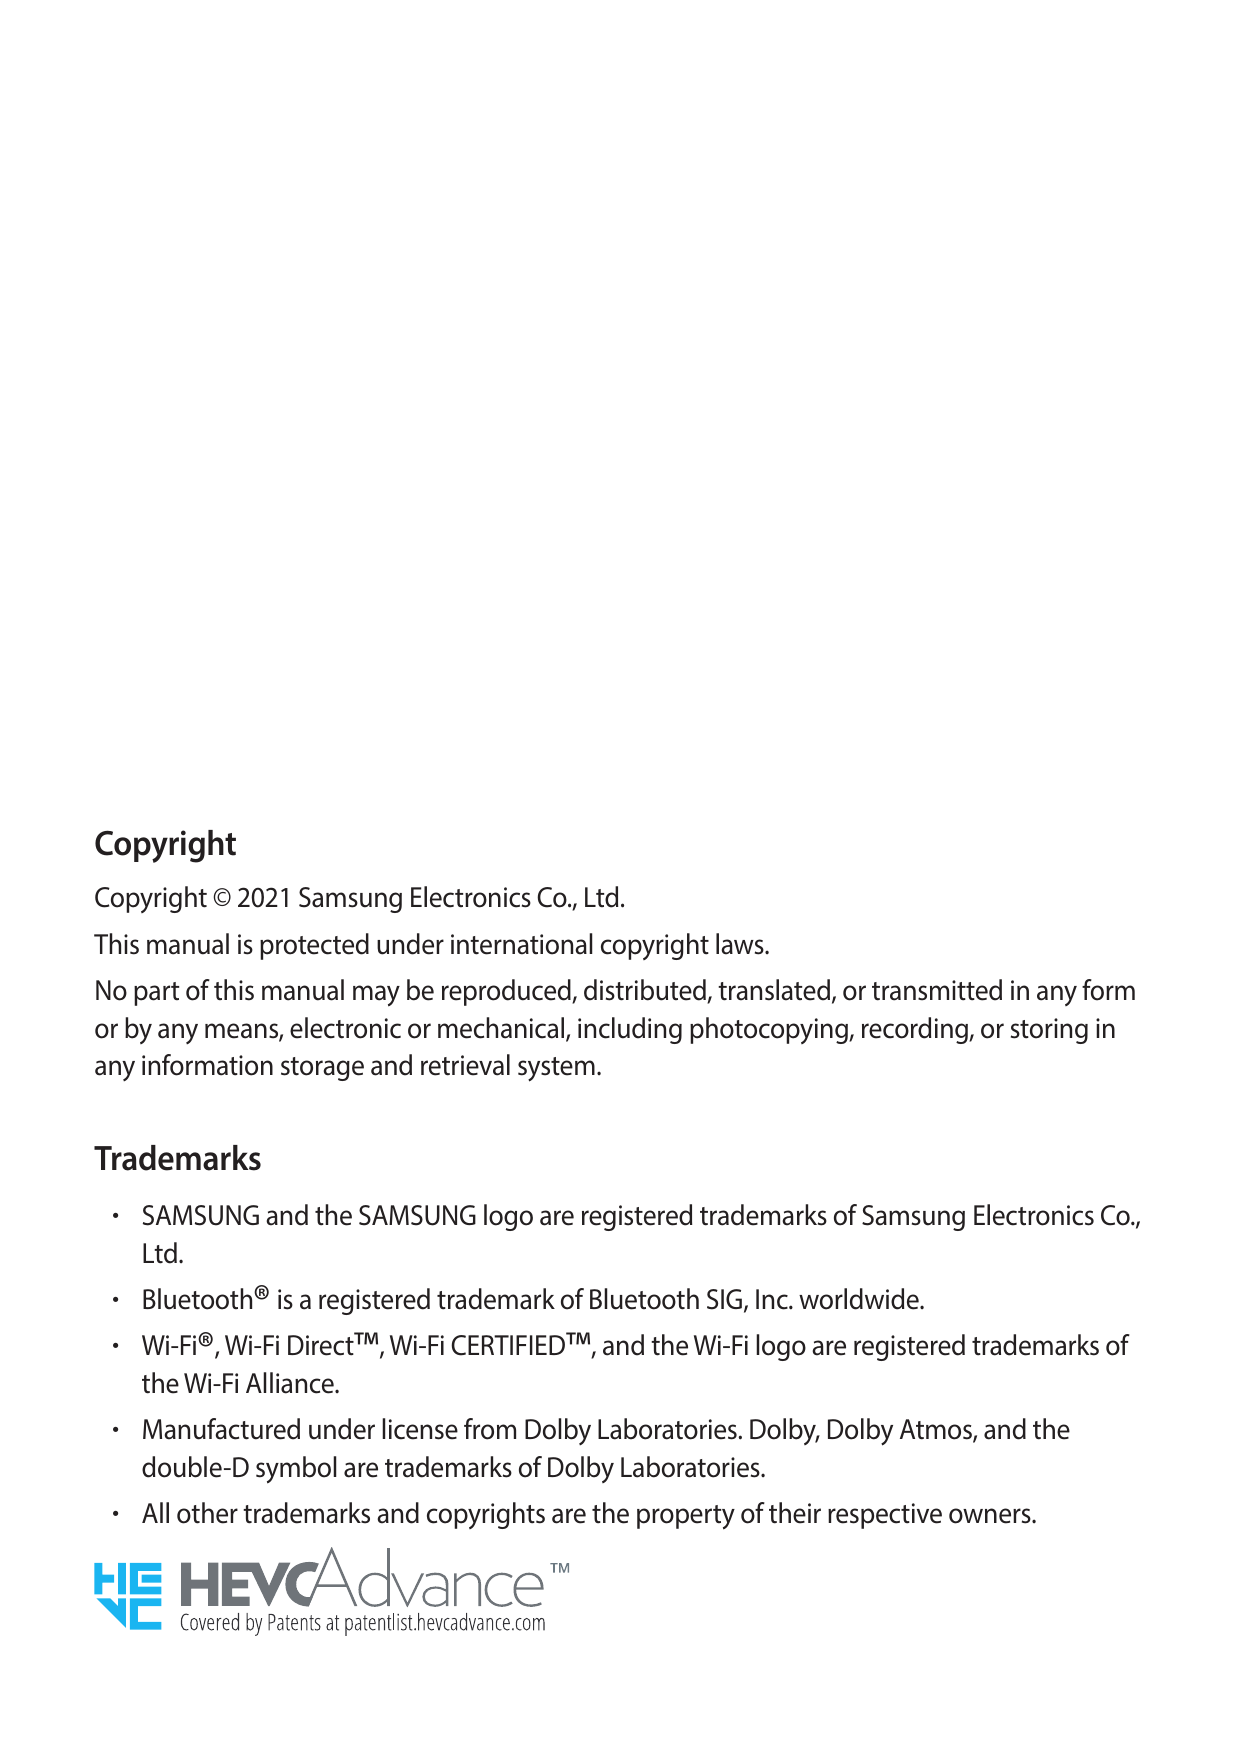 CopyrightCopyright © 2021 Samsung Electronics Co., Ltd.This manual is protected under international copyright laws.No part of th